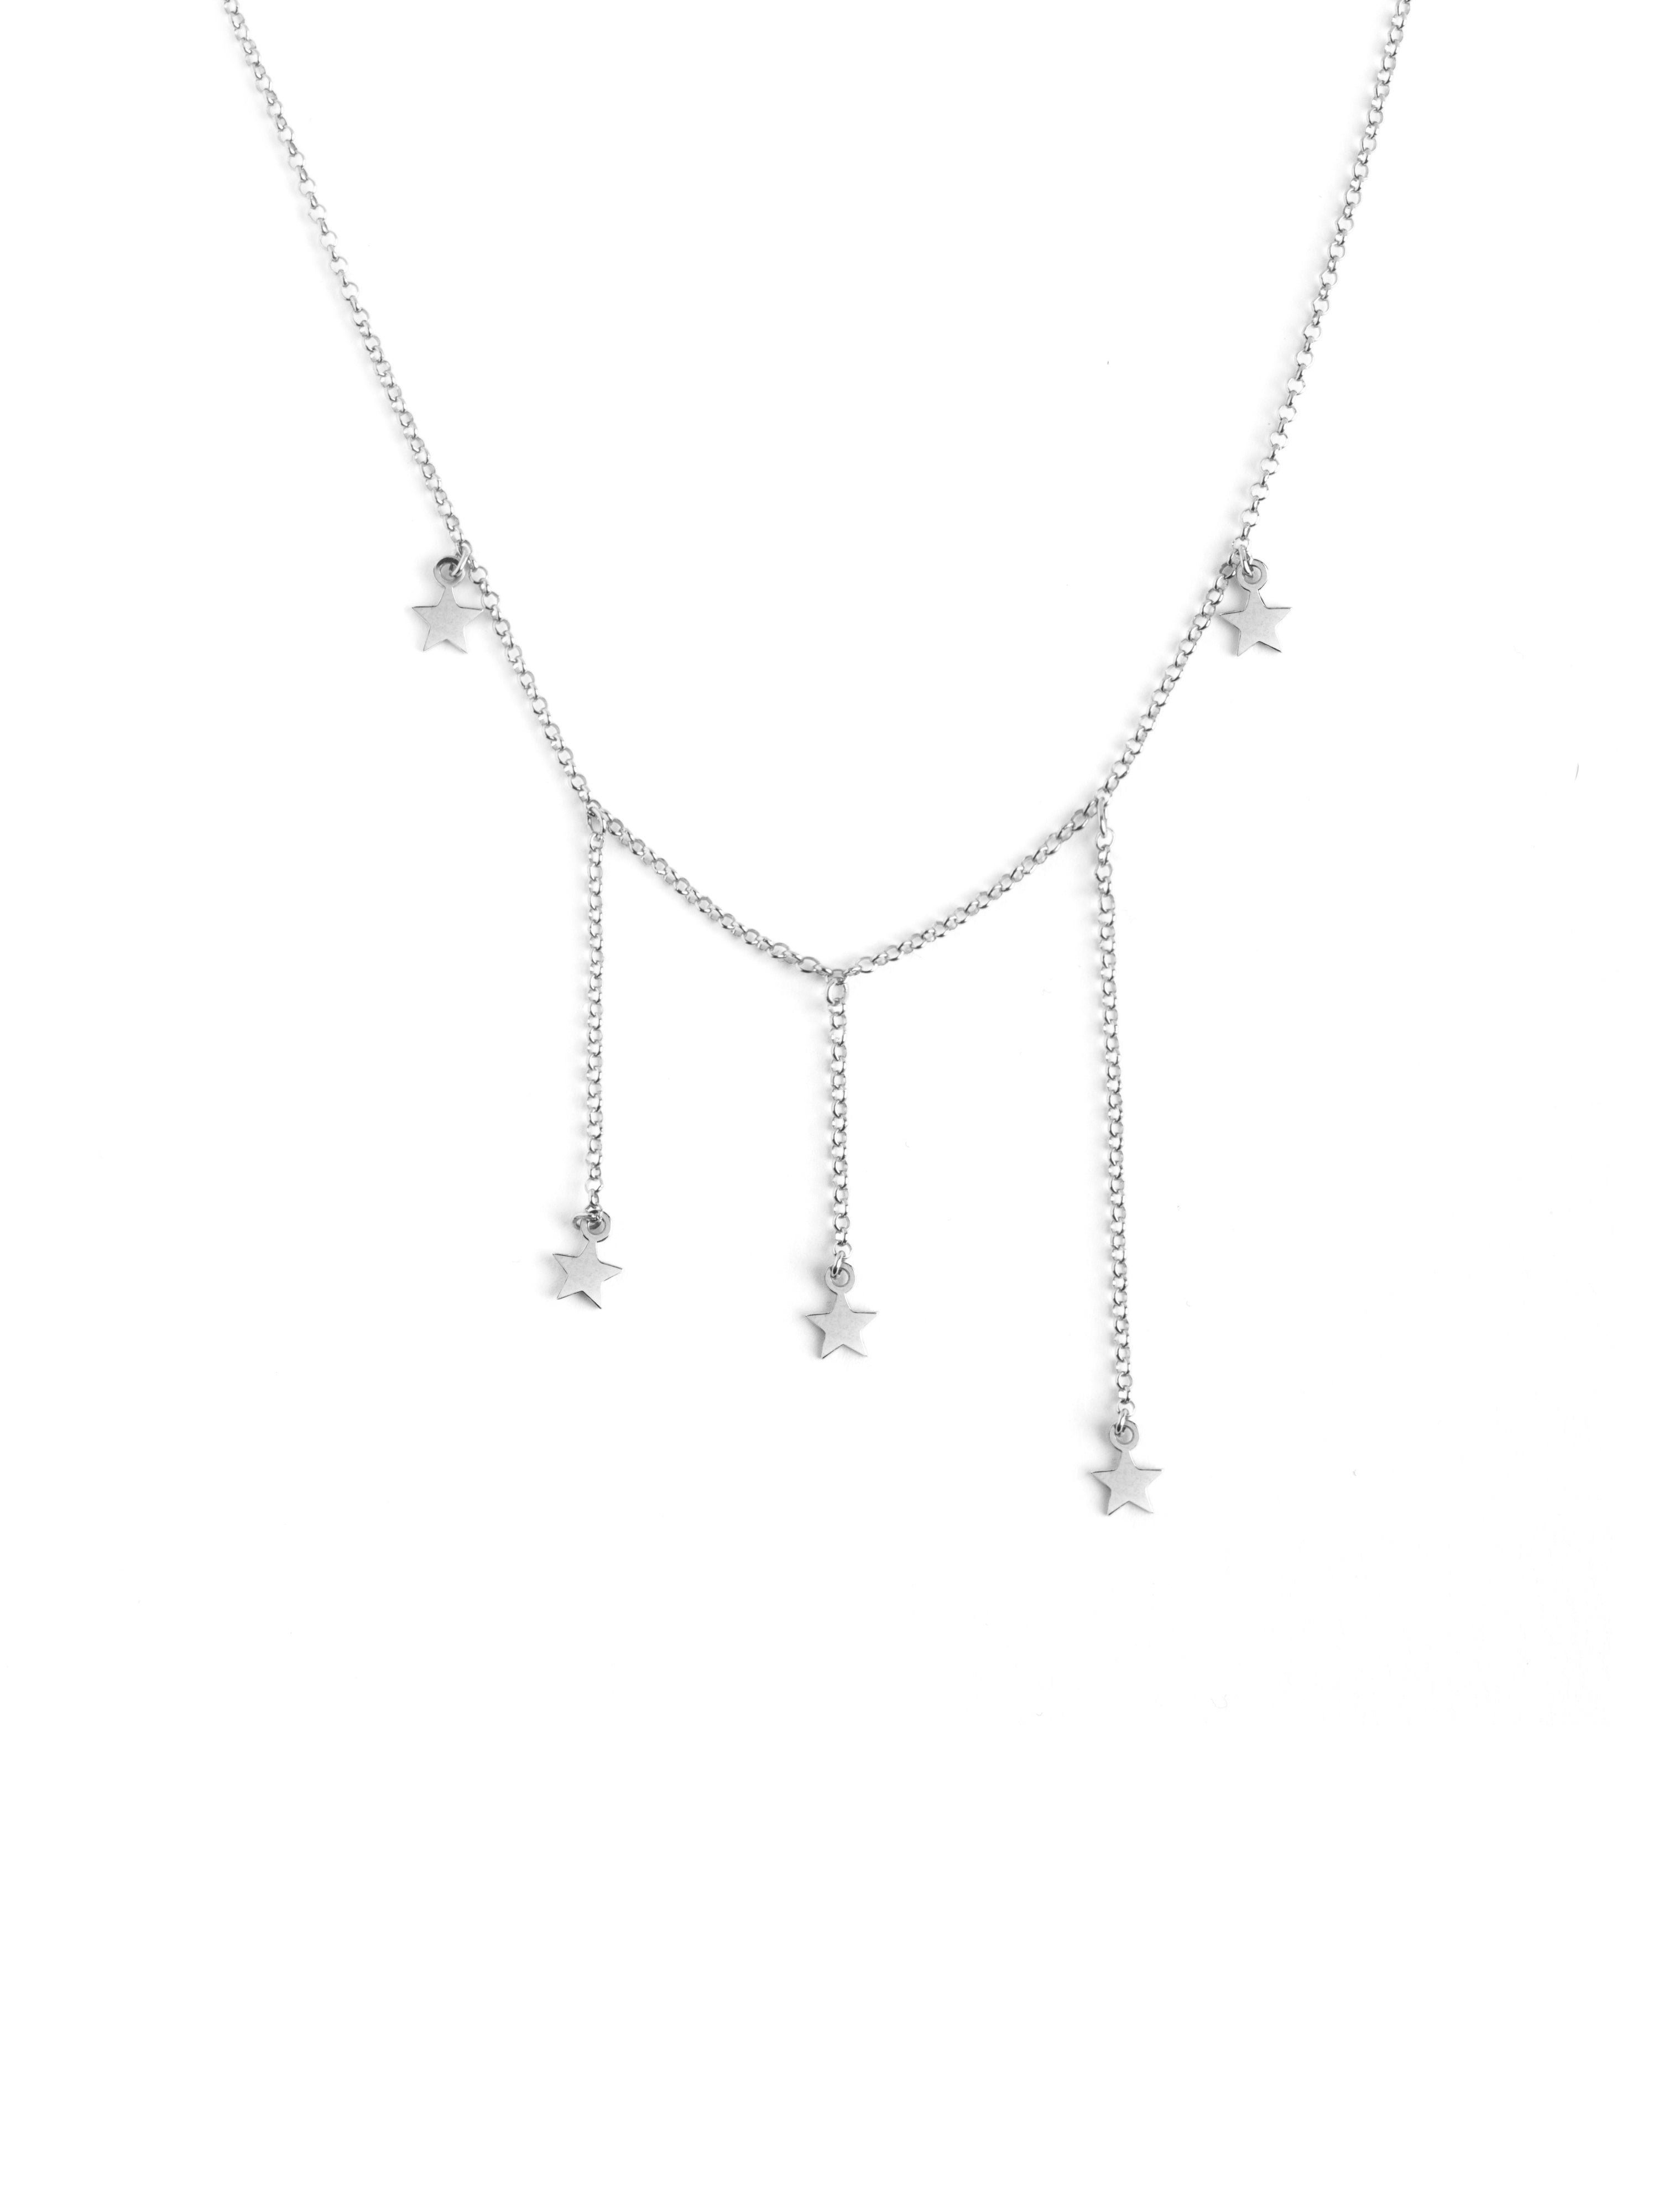 Falling Stars Silver Necklace